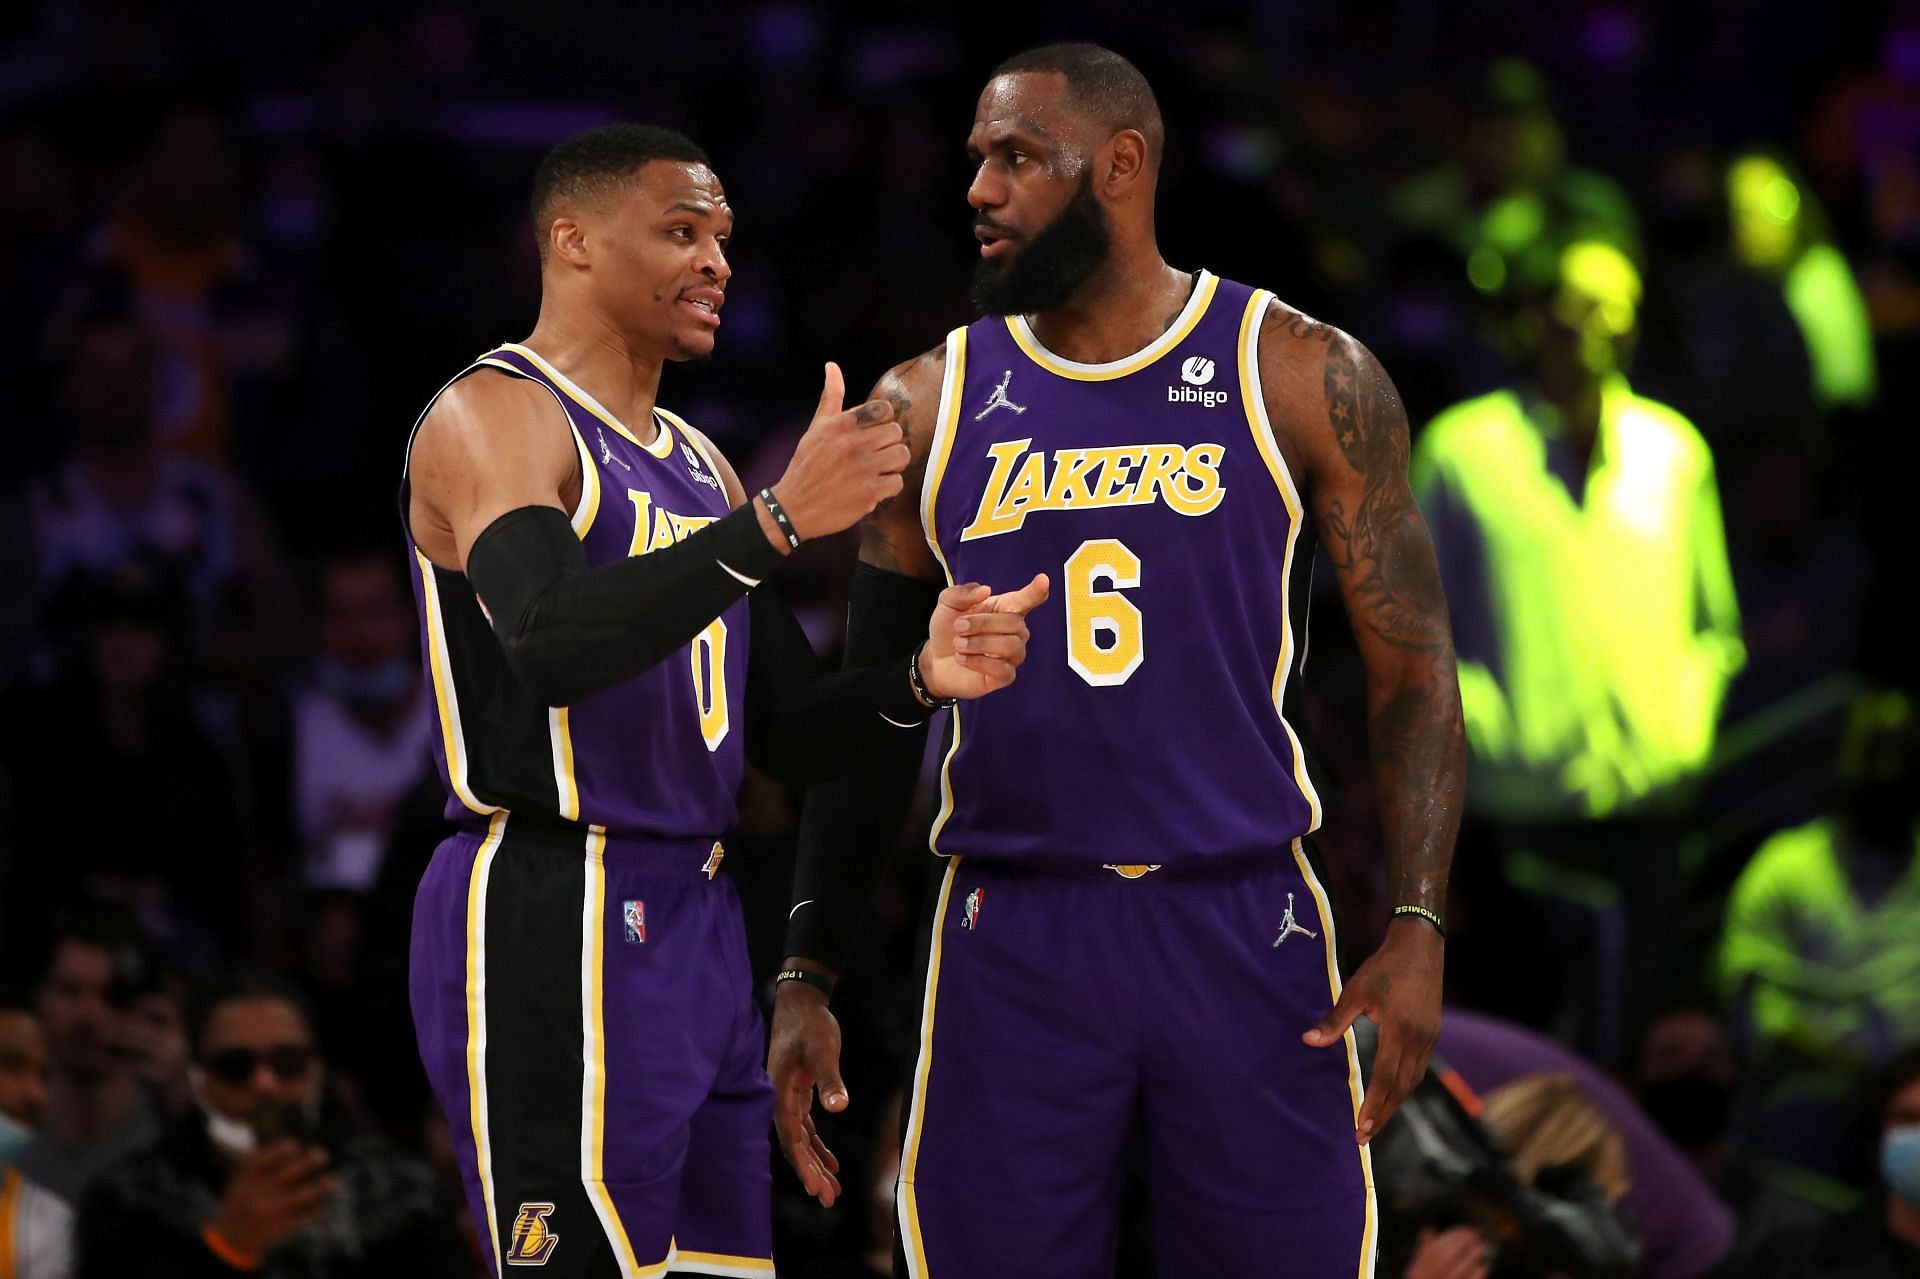 Los Angeles Lakers superstar forward LeBron James and Russell Westbrook